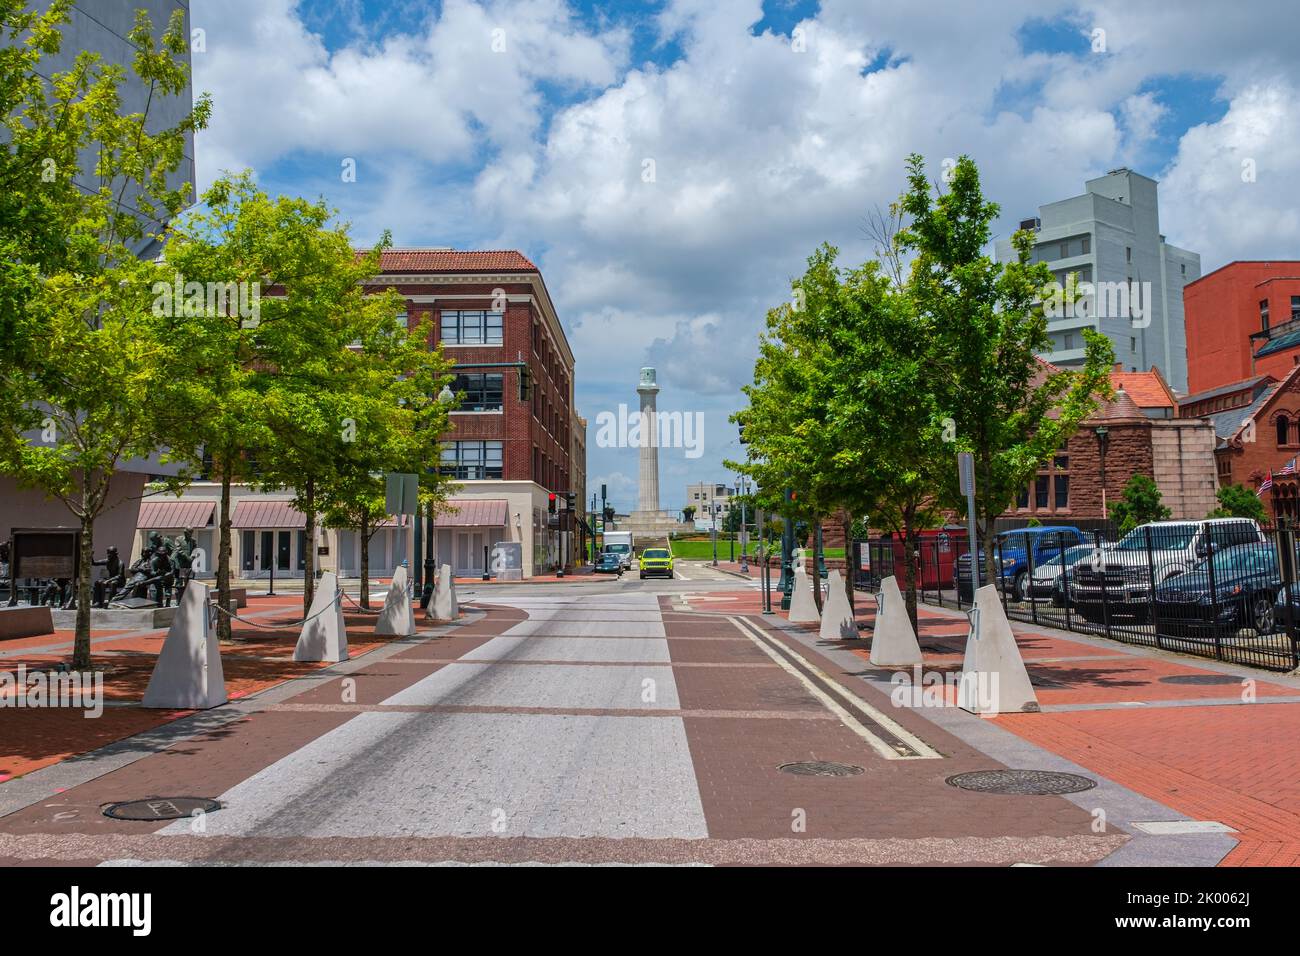 NEW ORLEANS, LA, USA - AUGUST 1, 2020: Cityscape on Andrew Higgins Boulevard looking west from the National World War II Museum. Stock Photo